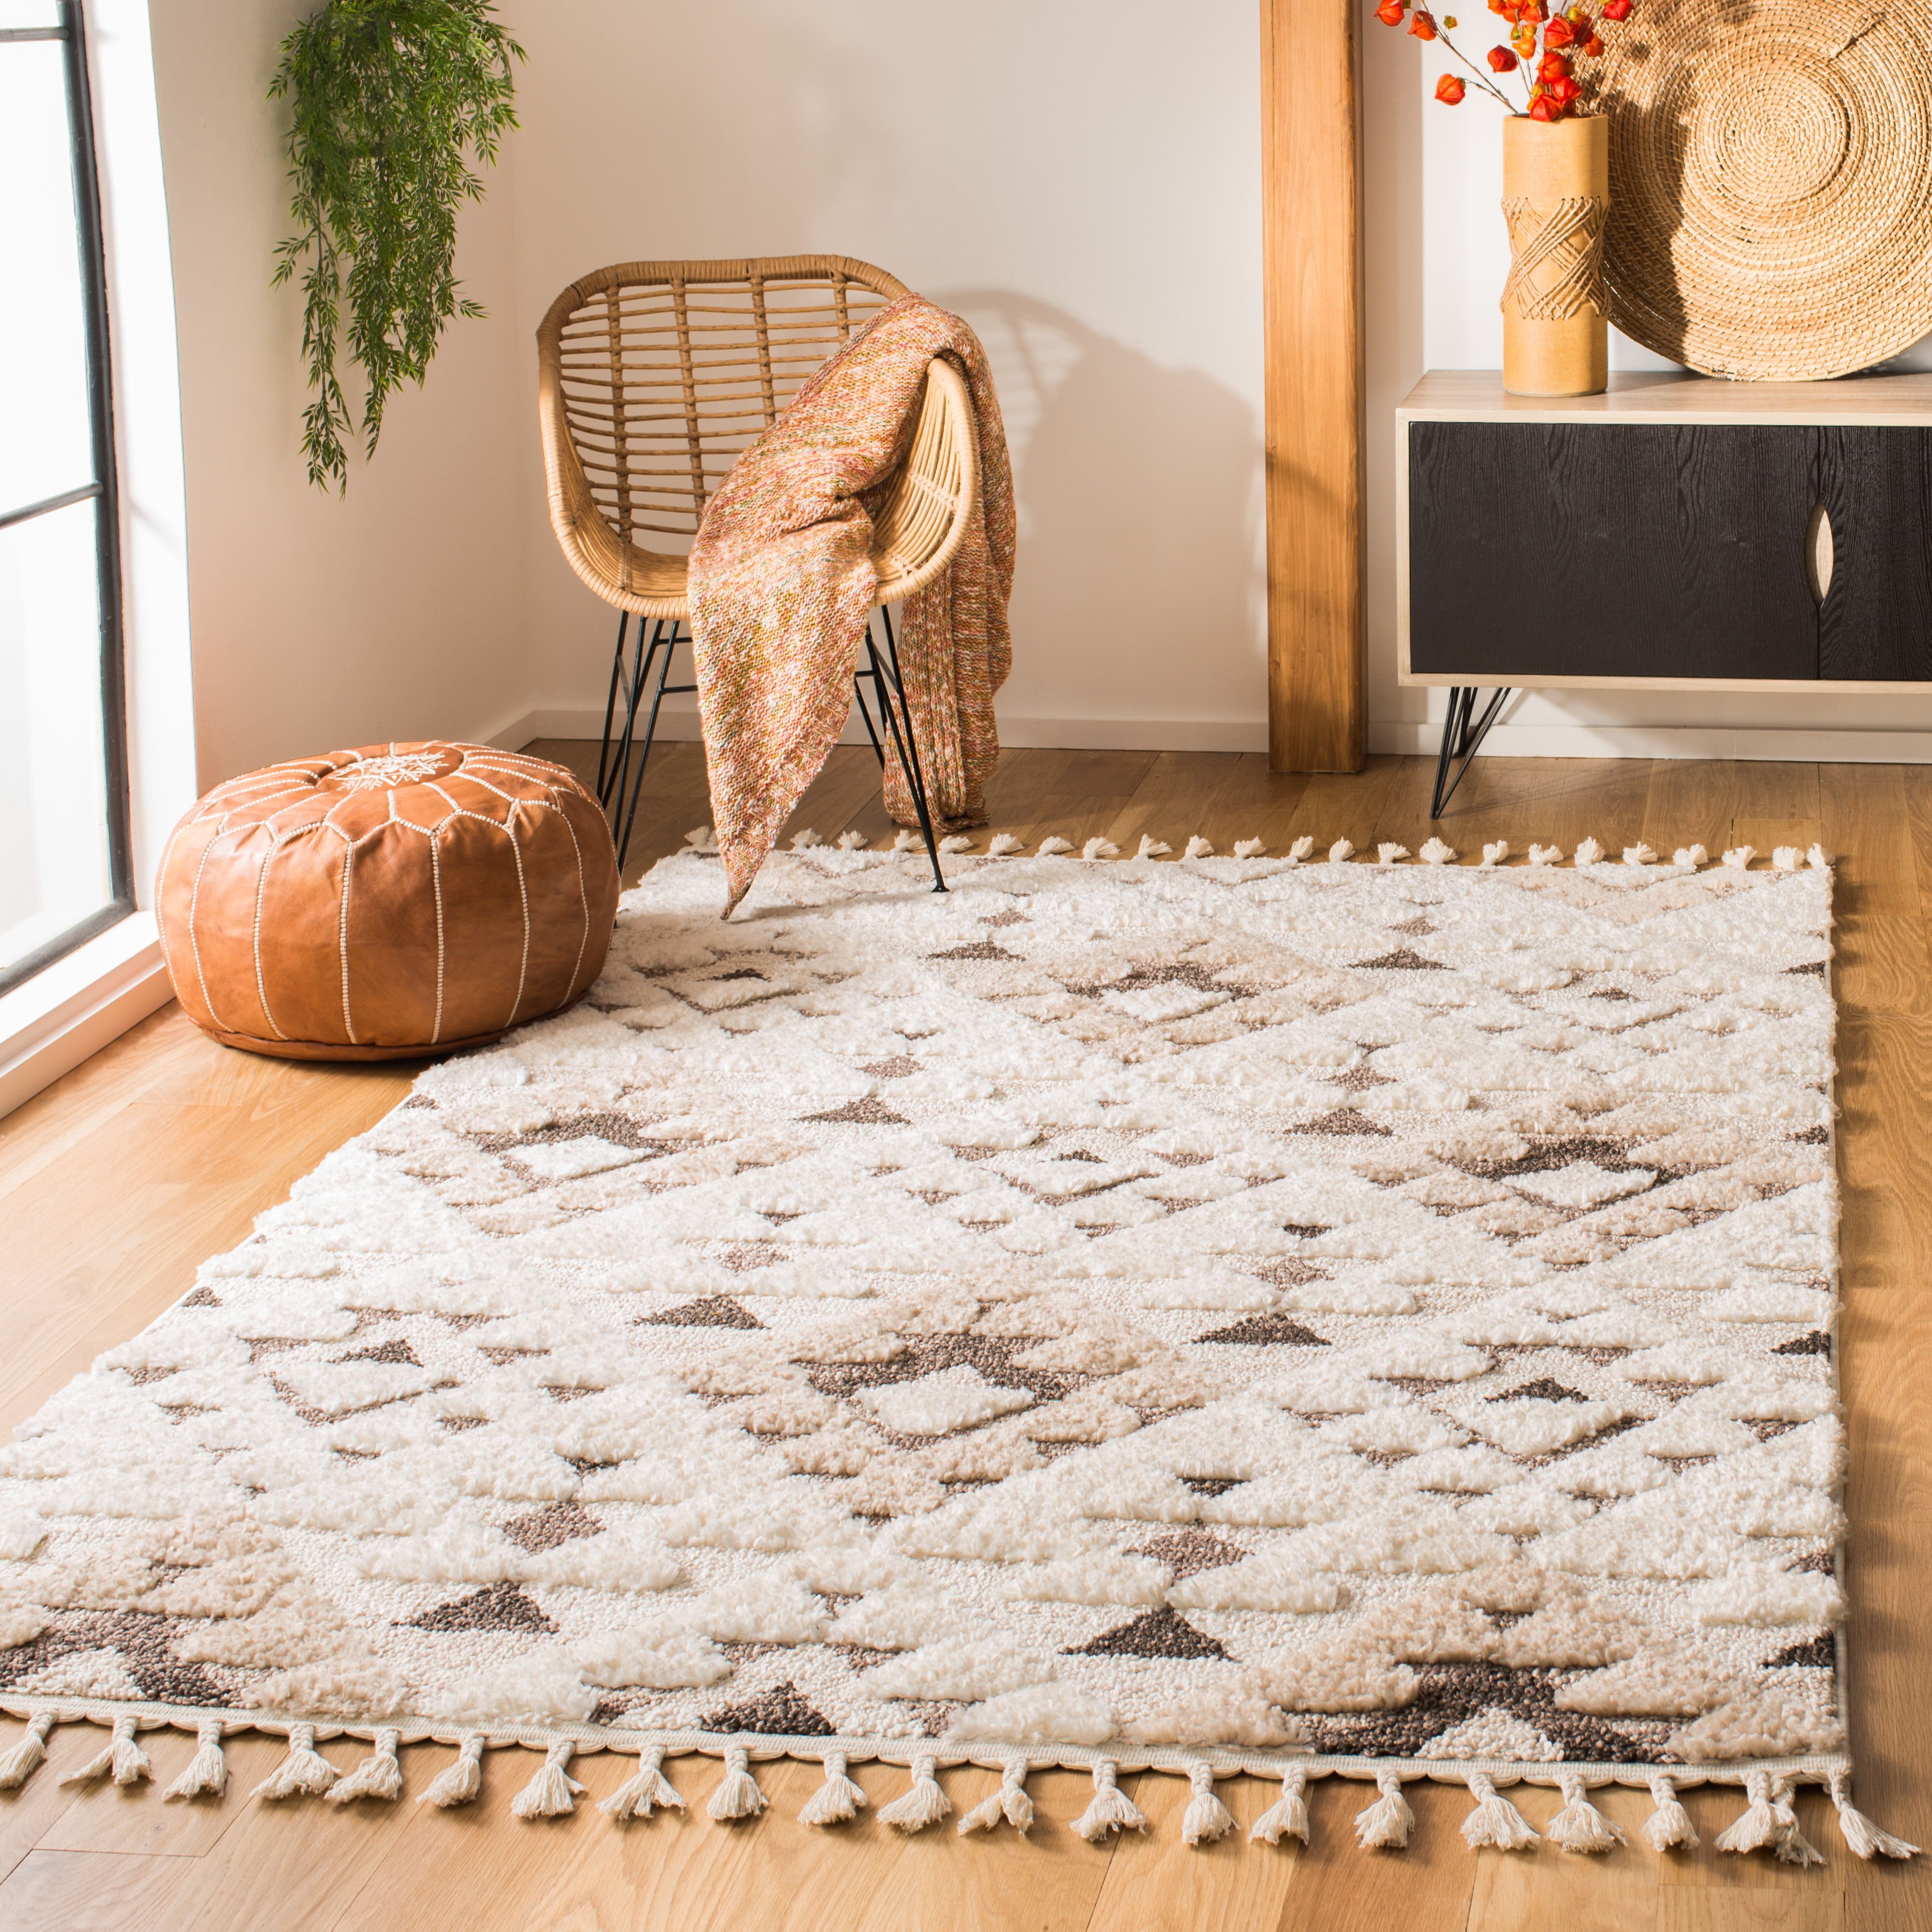 Safavieh Moroccan Tassel Shag Mts688A Ivory /Brown Rug – Walmart Pertaining To Moroccan Shag Rugs (View 9 of 15)